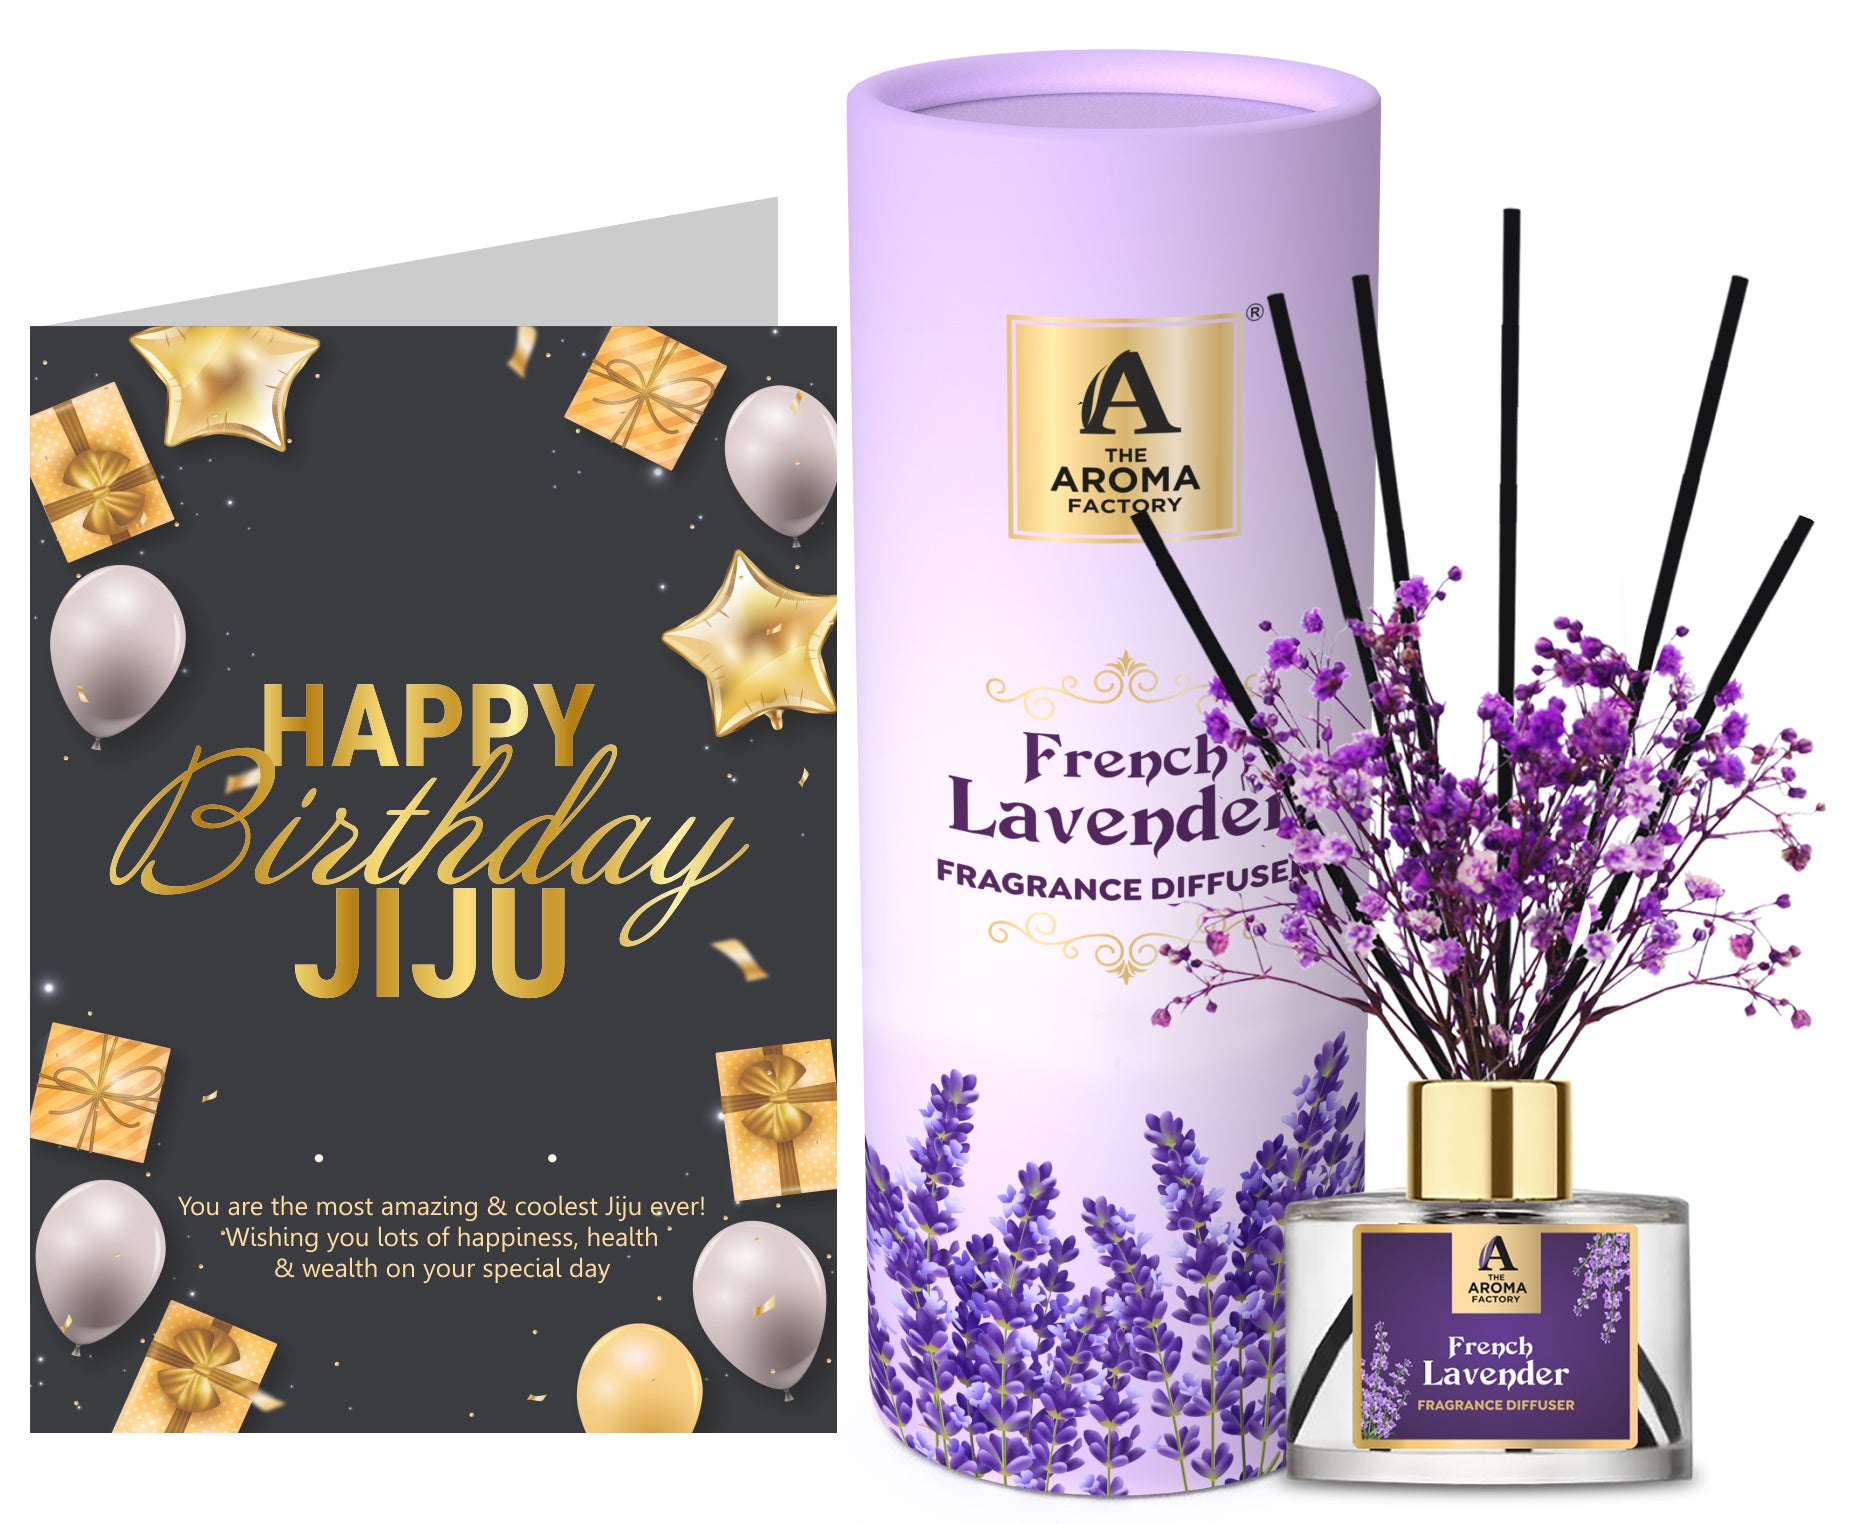 The Aroma Factory Happy Birthday Gift for Gift for Best Jiju/Jija jijaji with Card, French Lavender Fragrance Reed Diffuser Set (1 Box + 1 Card)